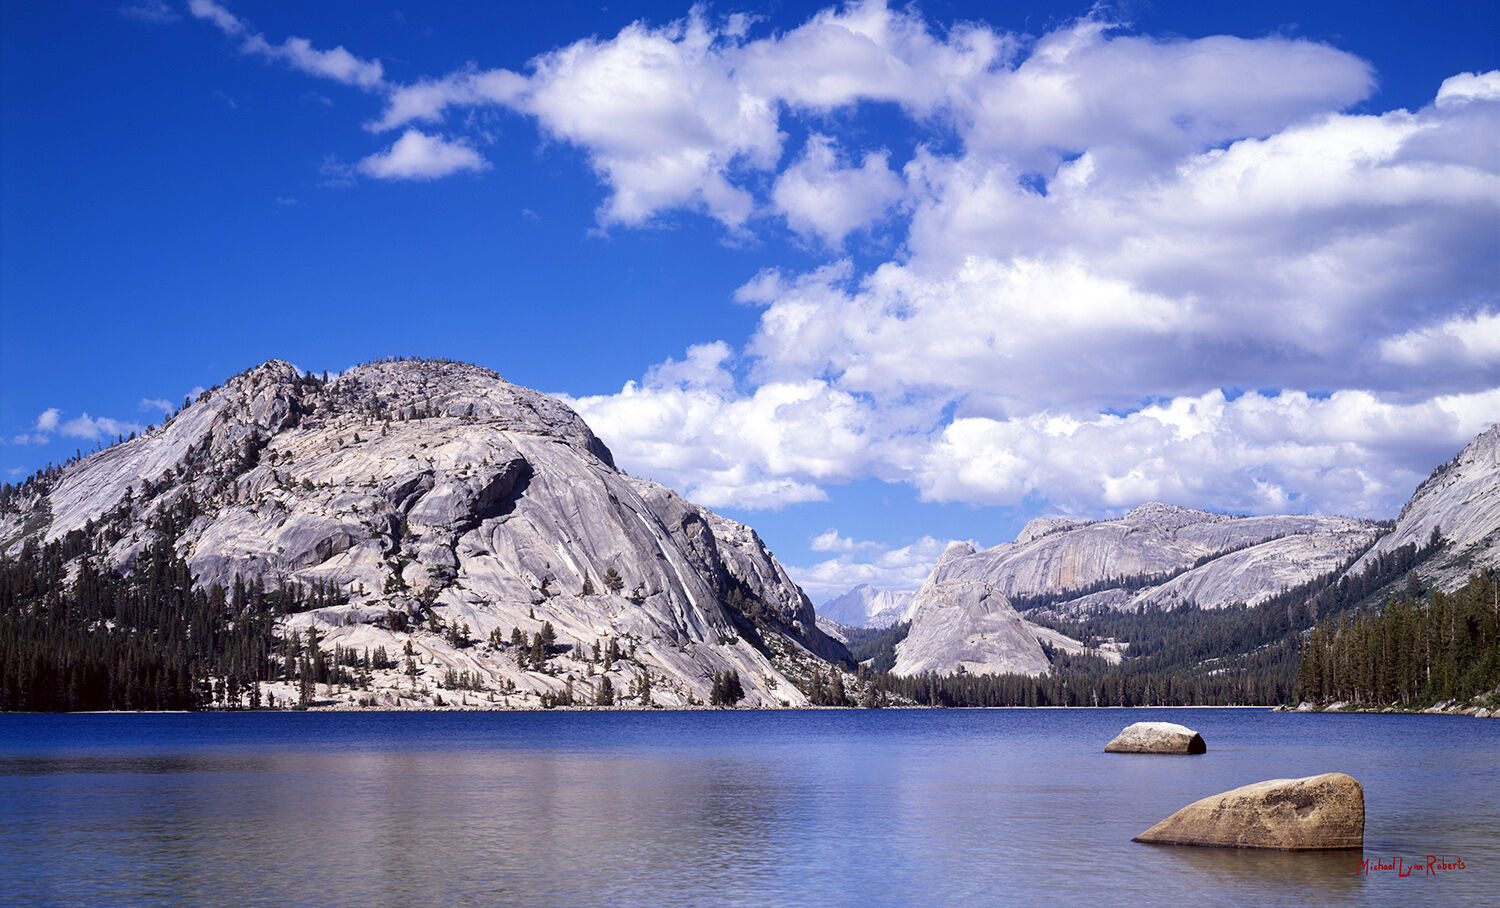 This photograph of beautiful Lake Tenaya (8,150'), an alpine lake in the high country of Yosemite National Park was inspired...